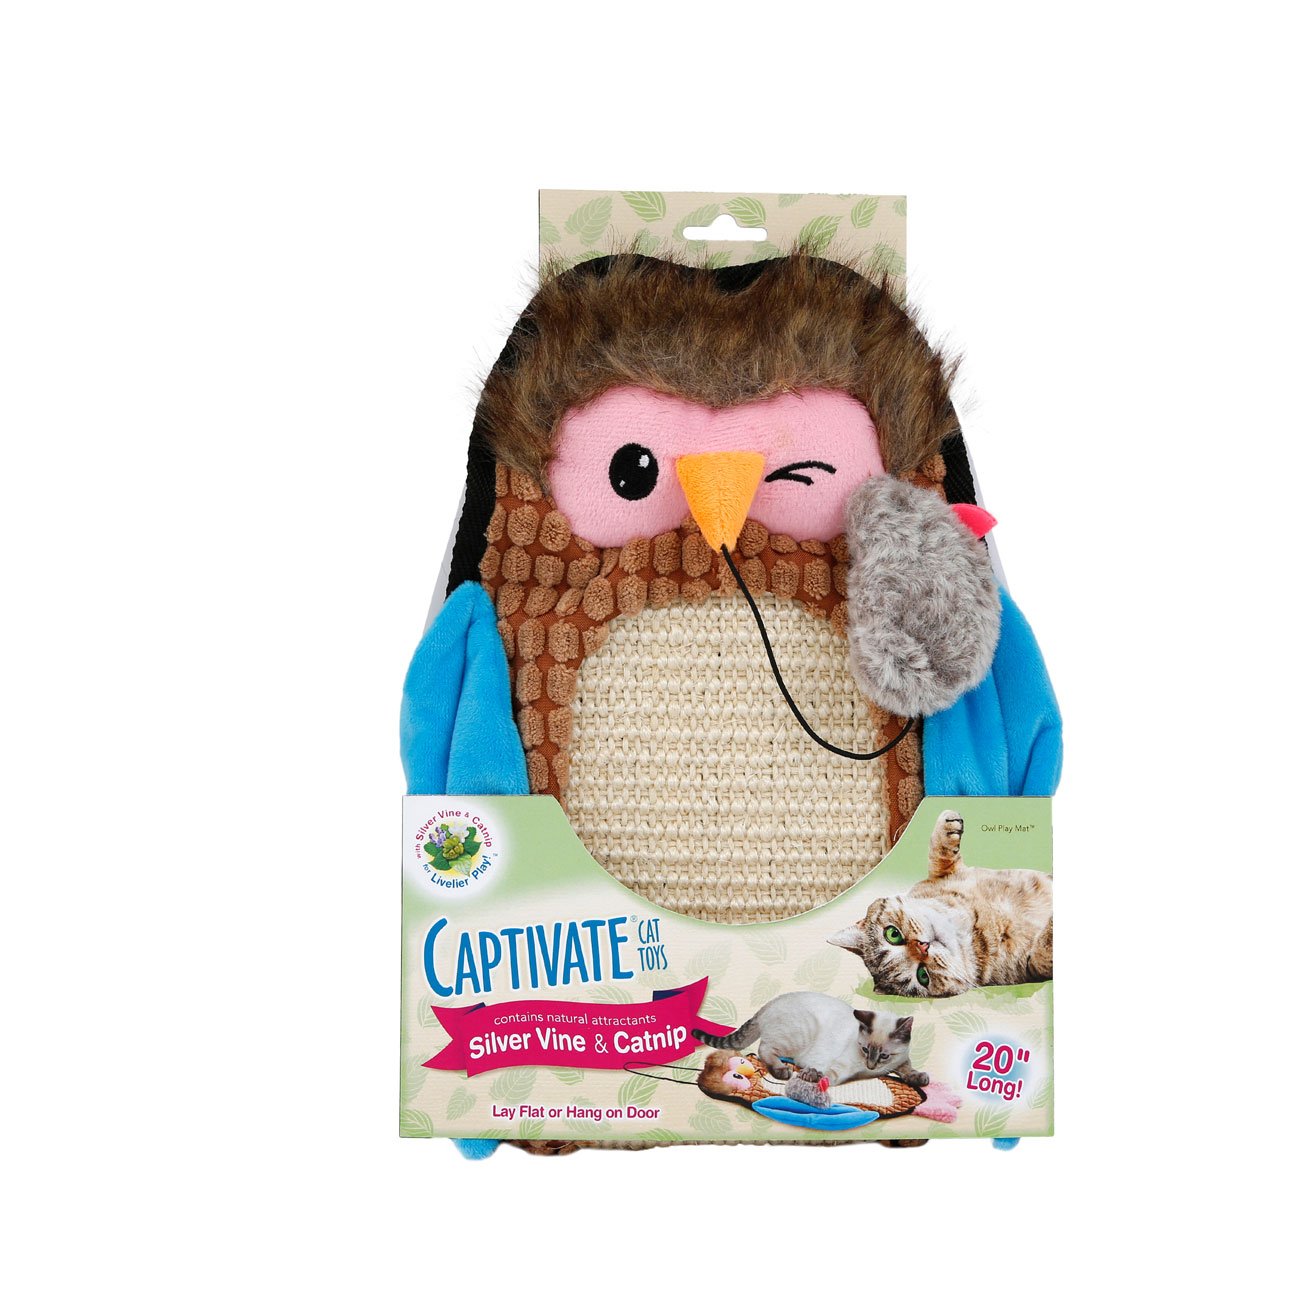 Captivate owl play mat cat toy.